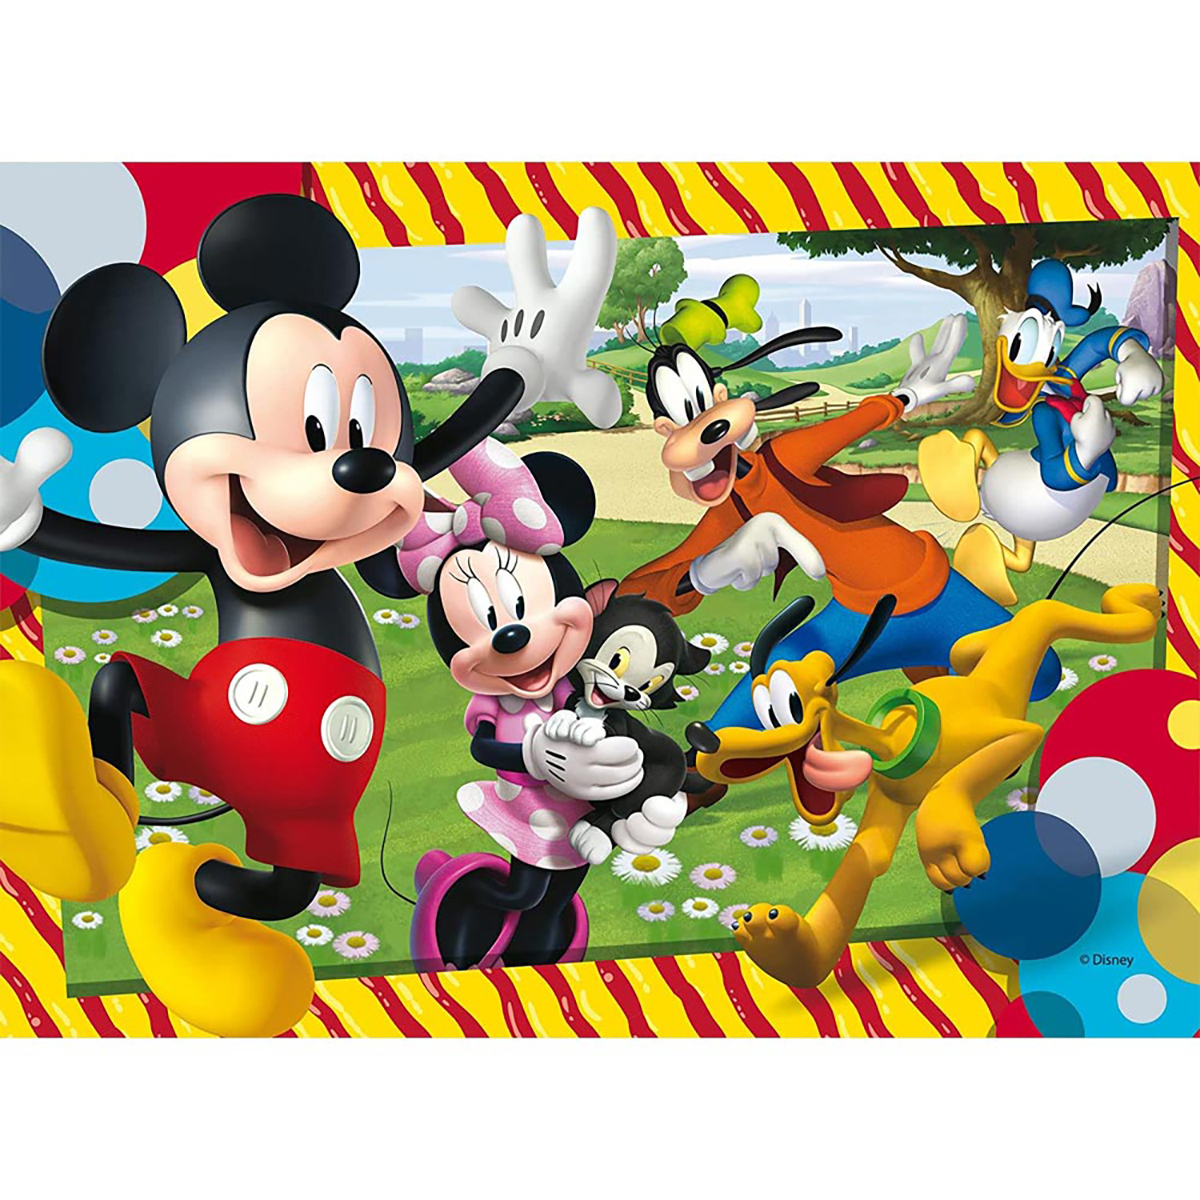 MICKEY MOUSE ECO-Ausmal-Puzzle Lisciani Puzzle Maus Boden Micky Teile, von 60